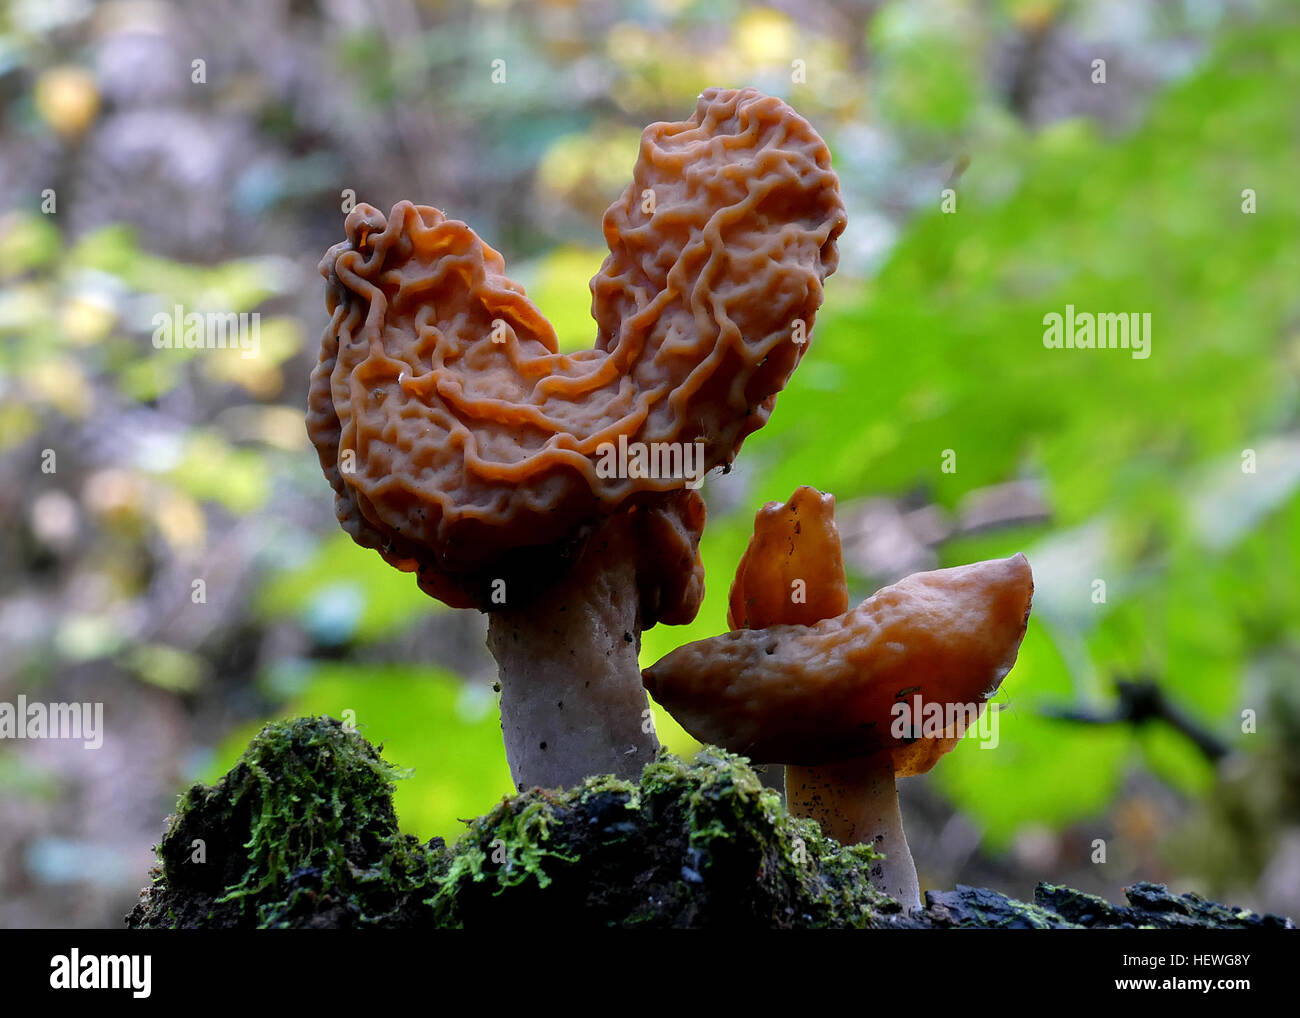 The false morels. These large operculate discomycetes have lobed and distorted, sometimes saddle-shaped caps and well-defined stalks. There are at least two species in New Zealand, the indigenous G. tasmanica and the exotic G. infula. Both are poisonous. Stock Photo